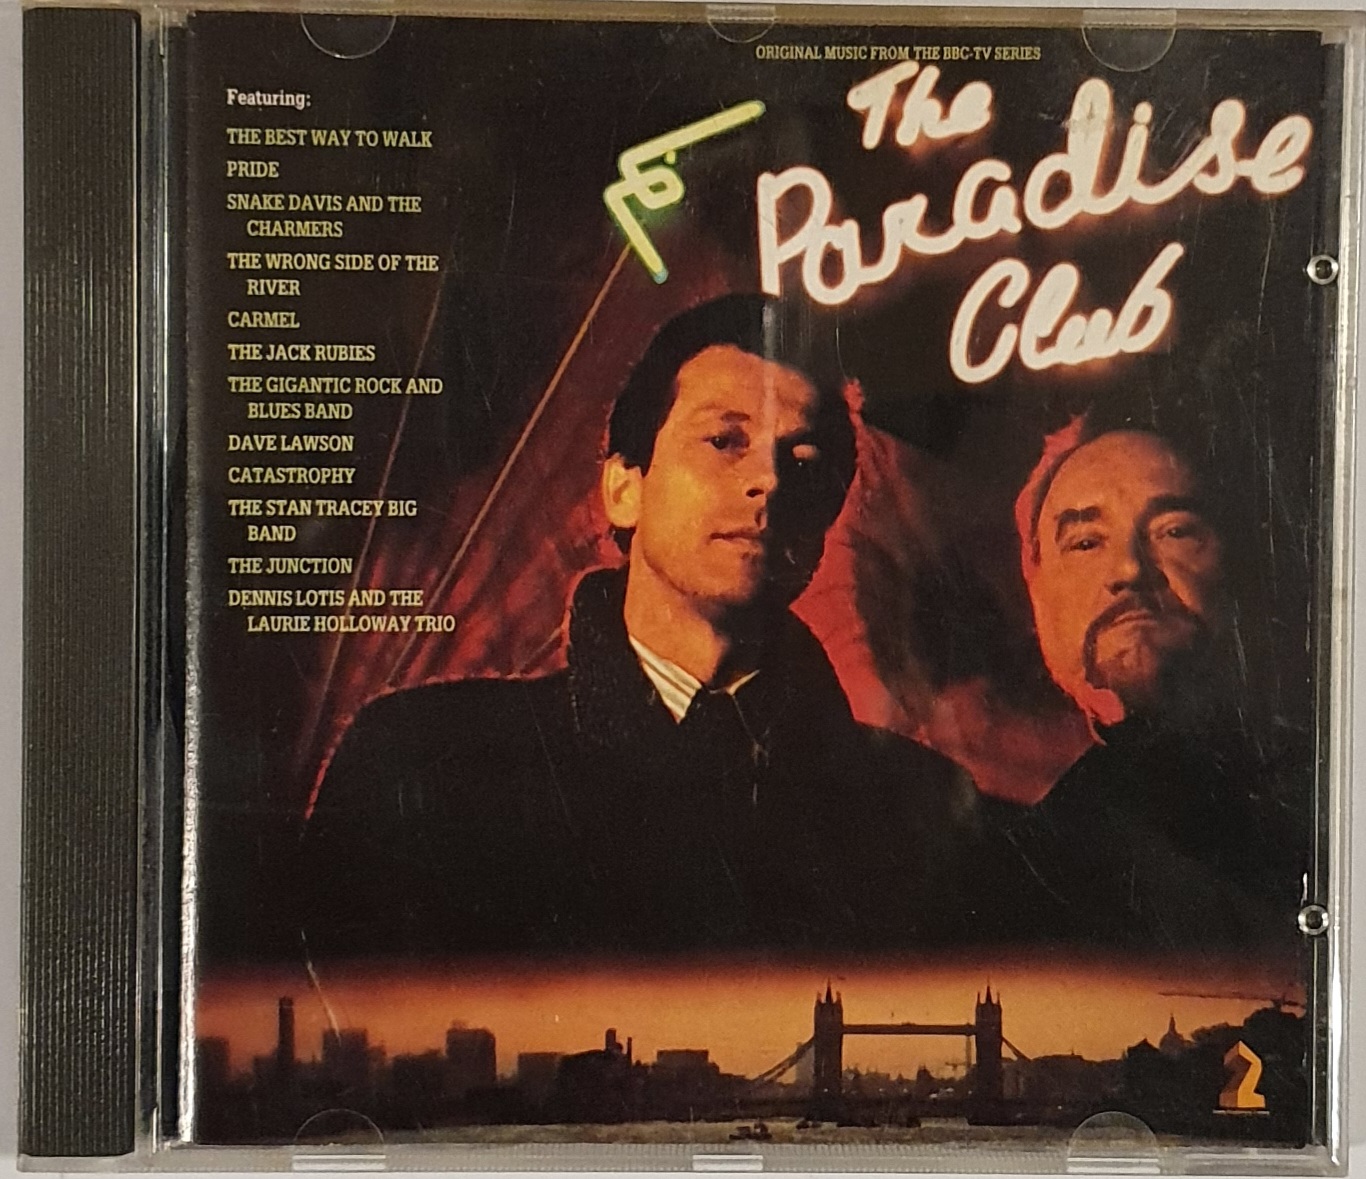 CD, Soundtrack, The Paradise Club (Original Music From The BBC TV Series)